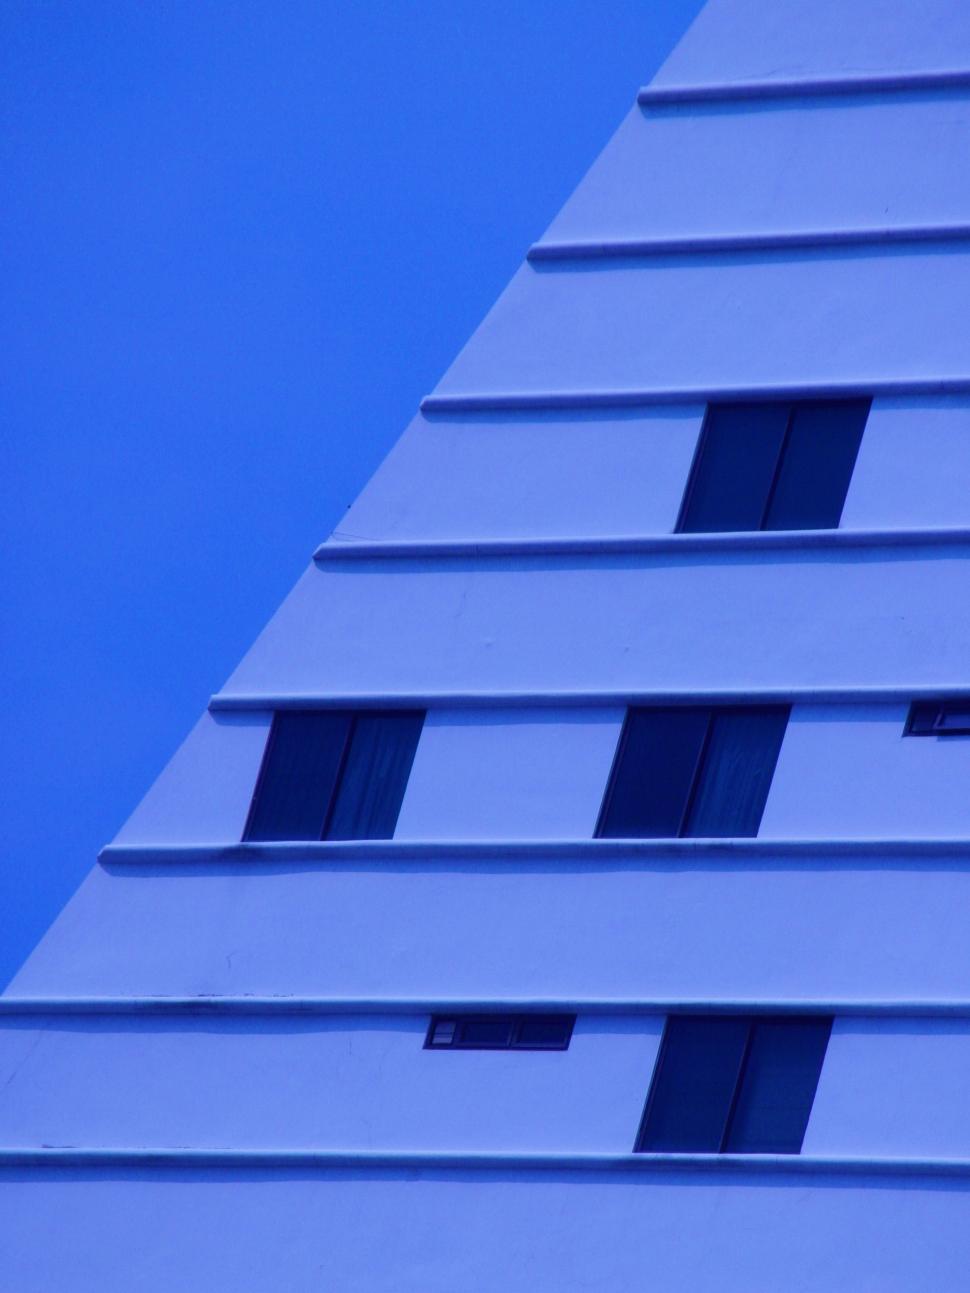 Free Image of Abstract Slanted Building 